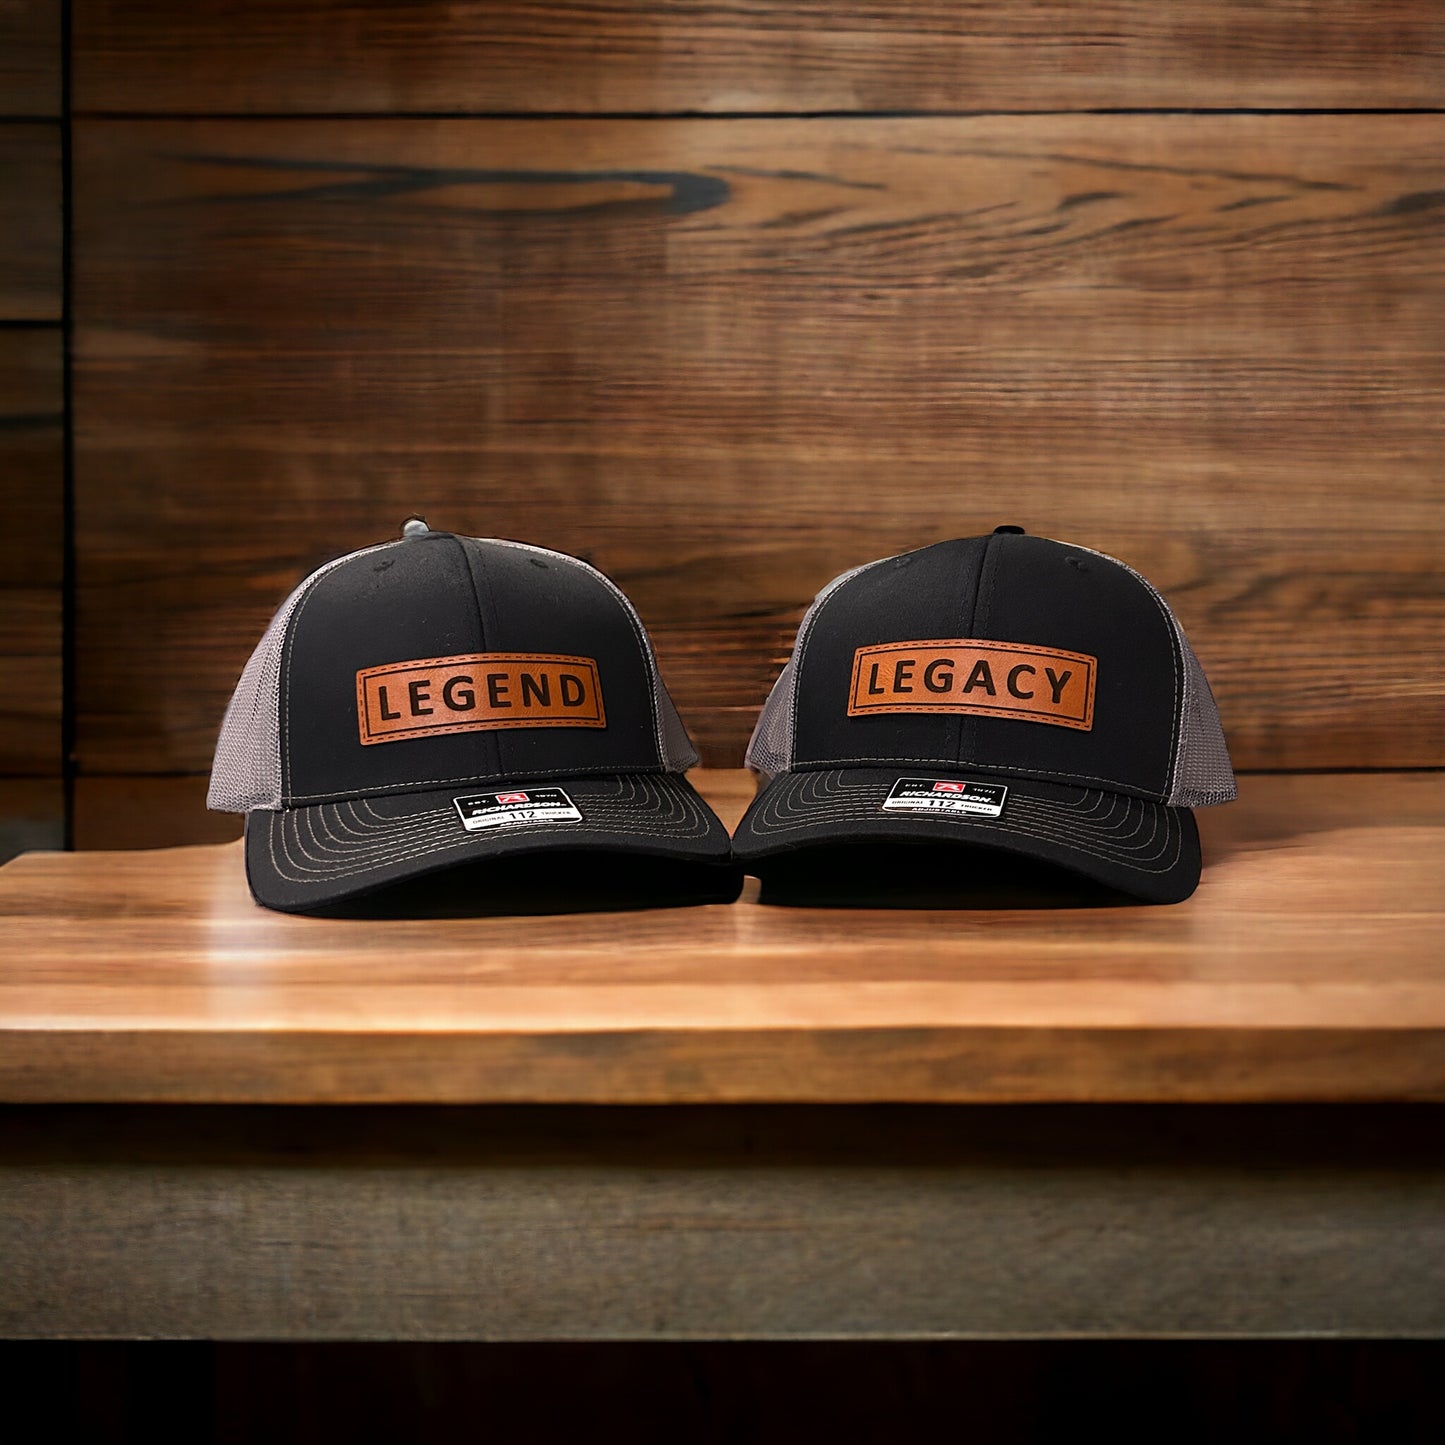 legend and legacy hats for father and son, matching hats father and son, matching legend and legacy hats for father and son, hats for dad, fathers day gifts, leather patch hats, custom leather aptch ahts, custom richardson leather patch trucker hats, custom hats, custom caps, custom fathers day hats